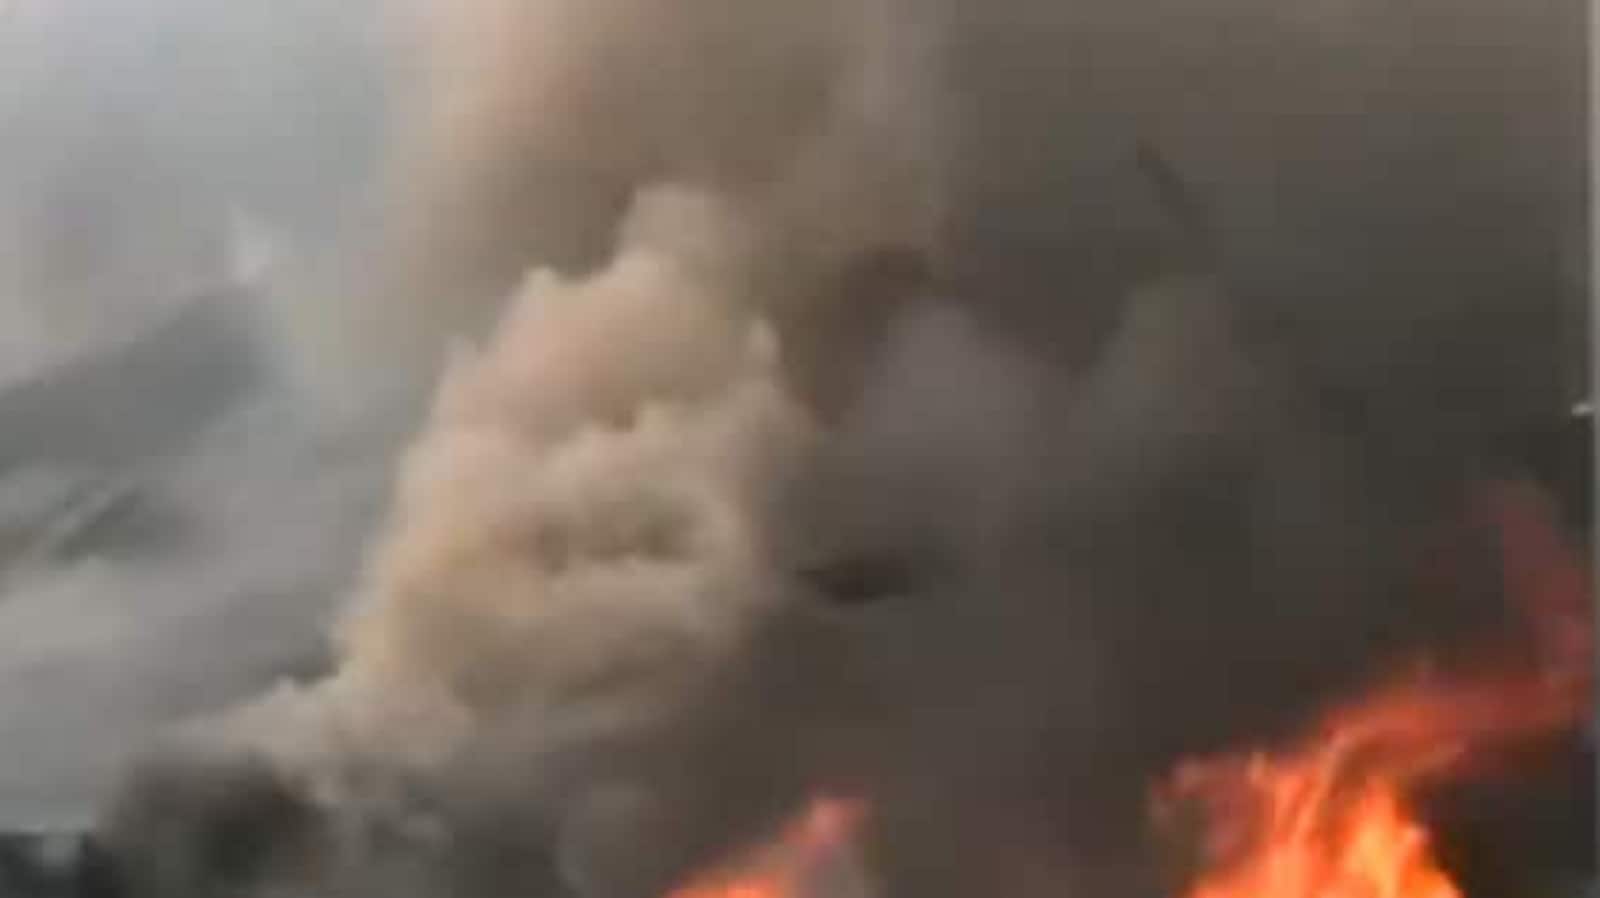 Massive fire breaks out at girls' school in Pakistan's Khyber Pakhtunkhwa, students rescued